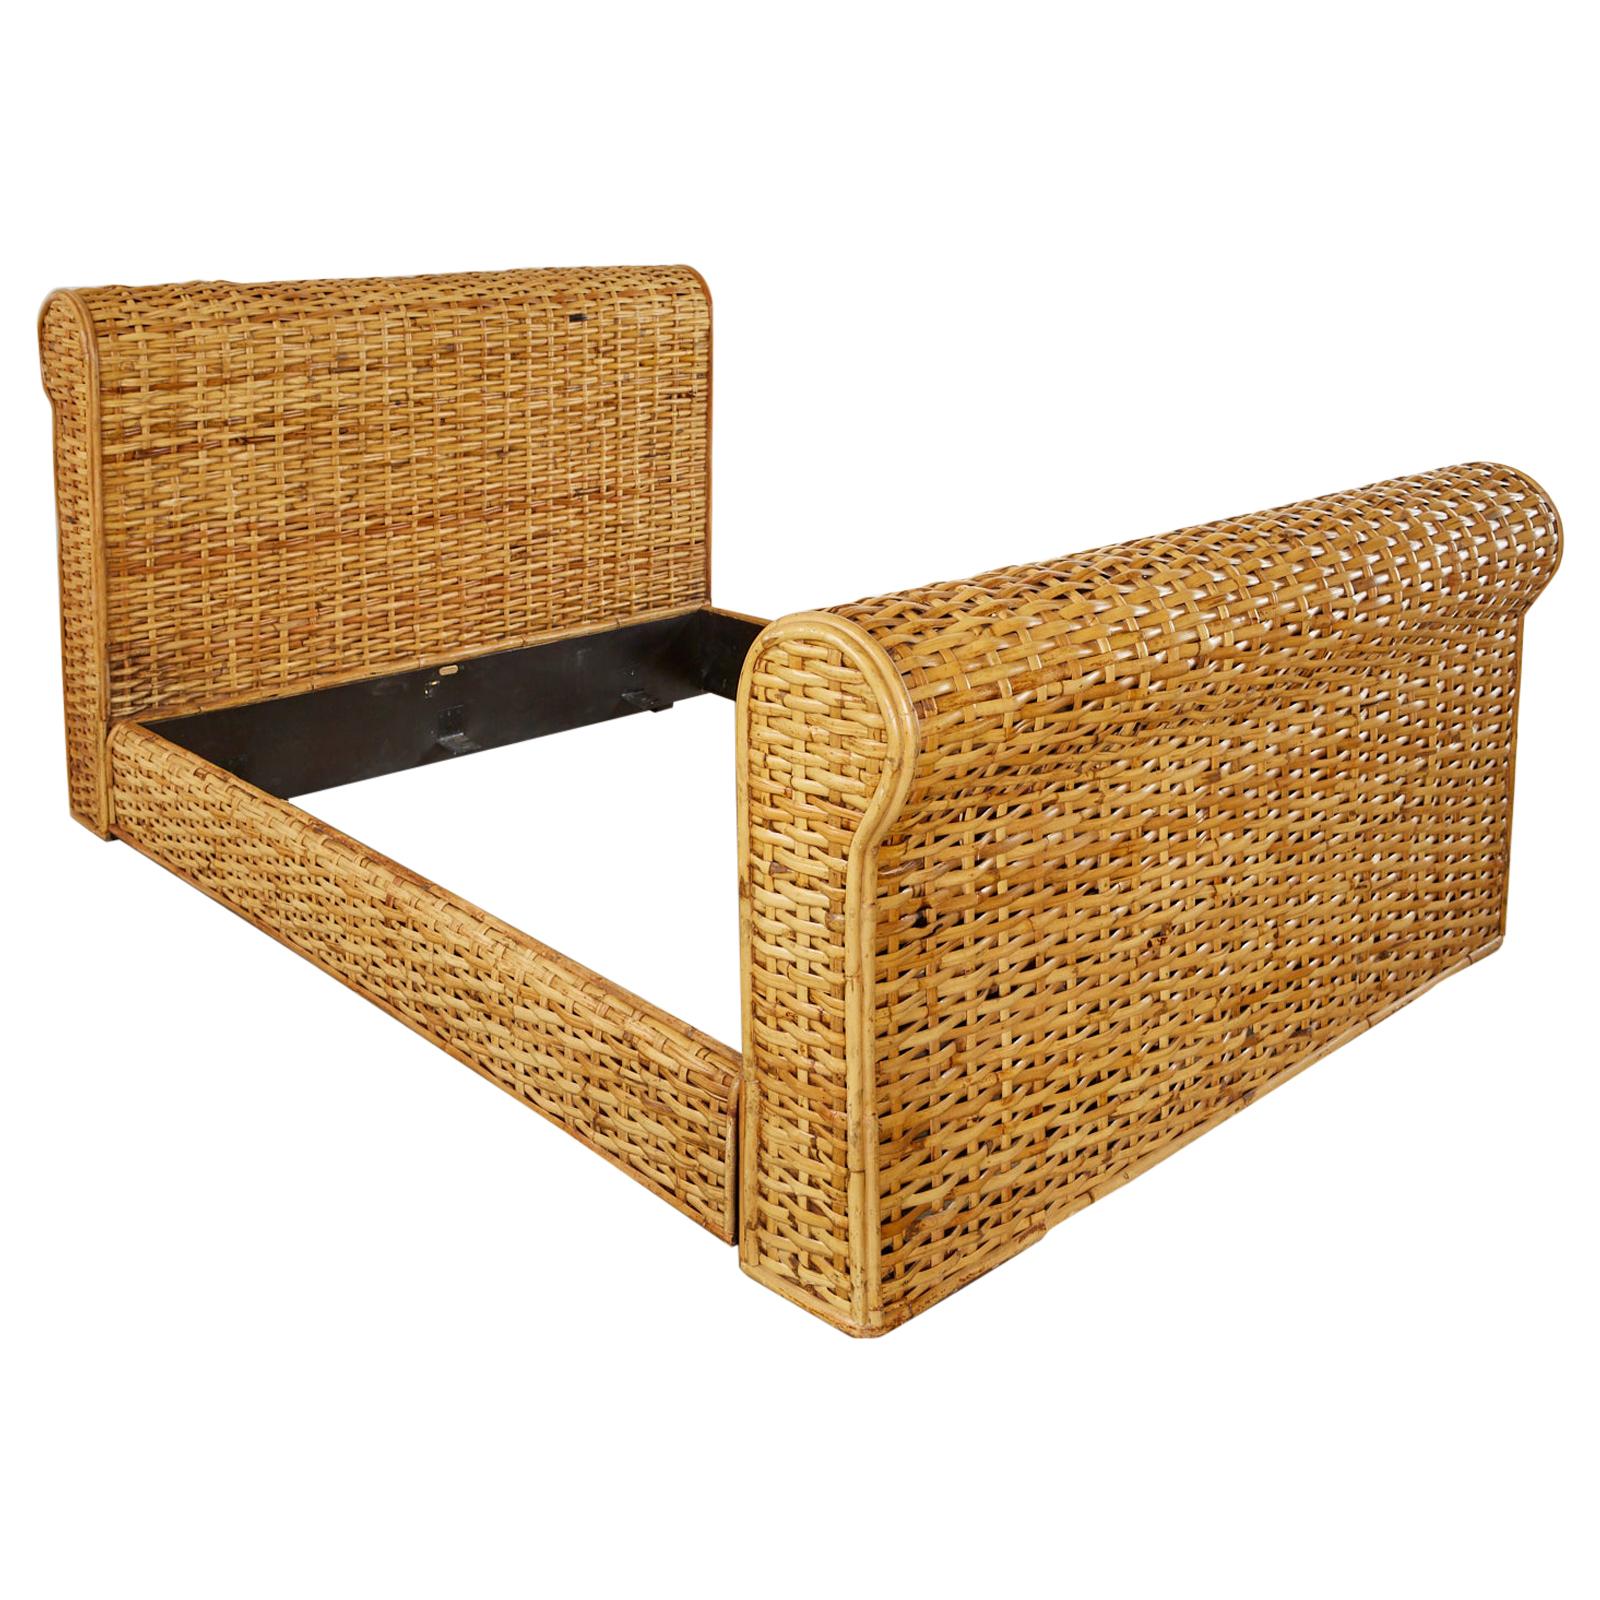 Ralph Lauren Home Polo Collection Woven Rattan Bed